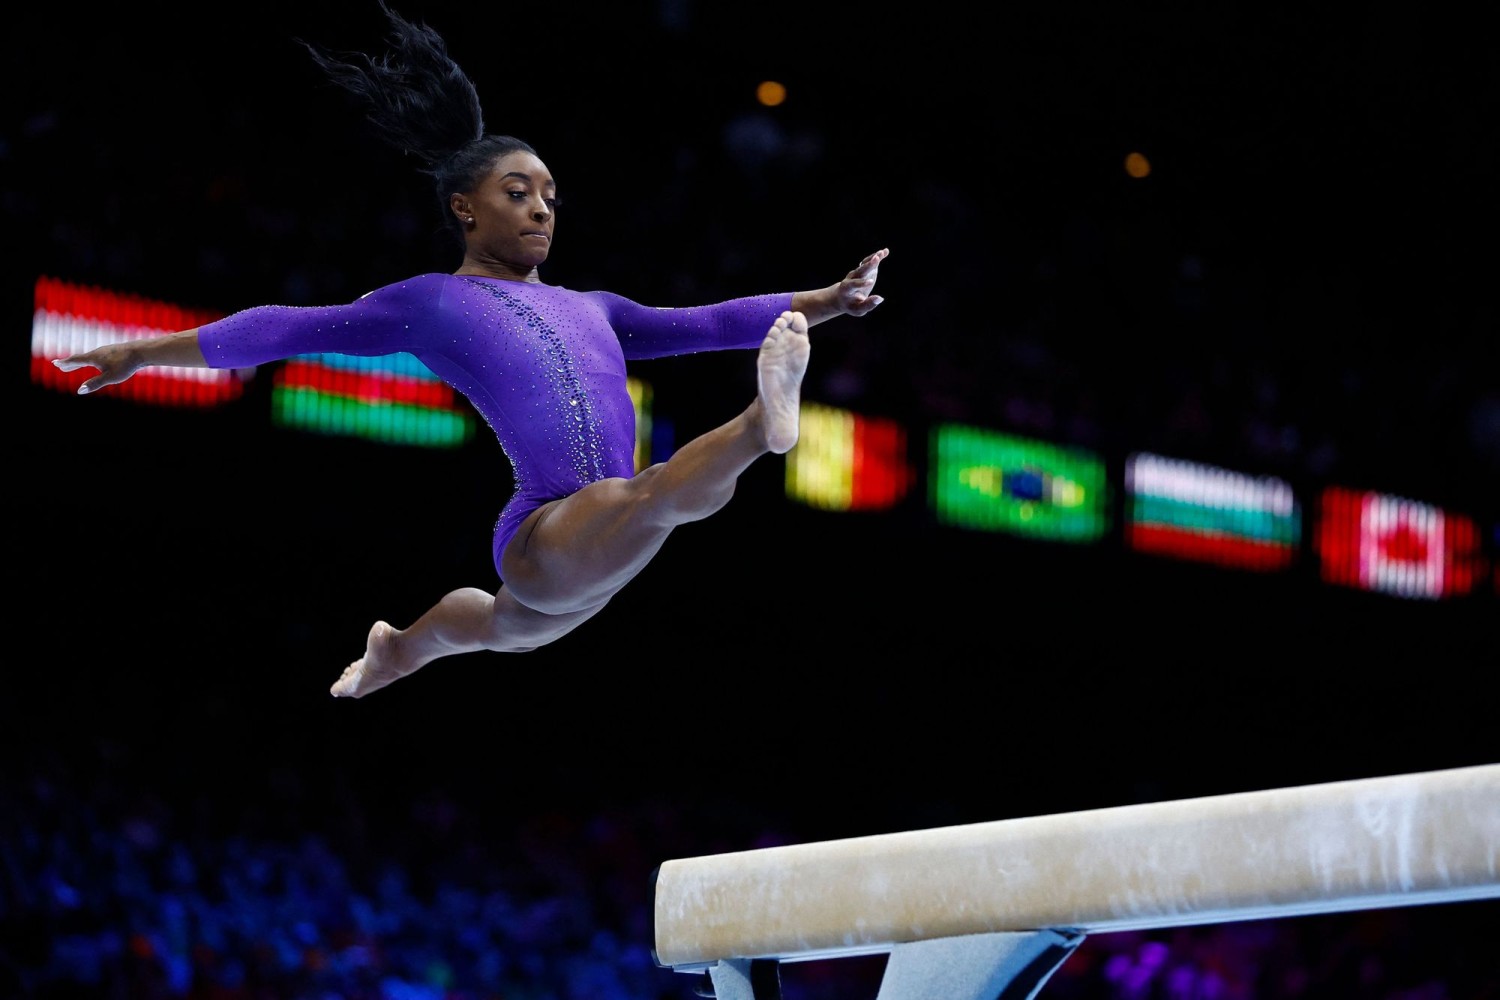 Simone Biles Is Officially the Most Decorated Gymnast in History